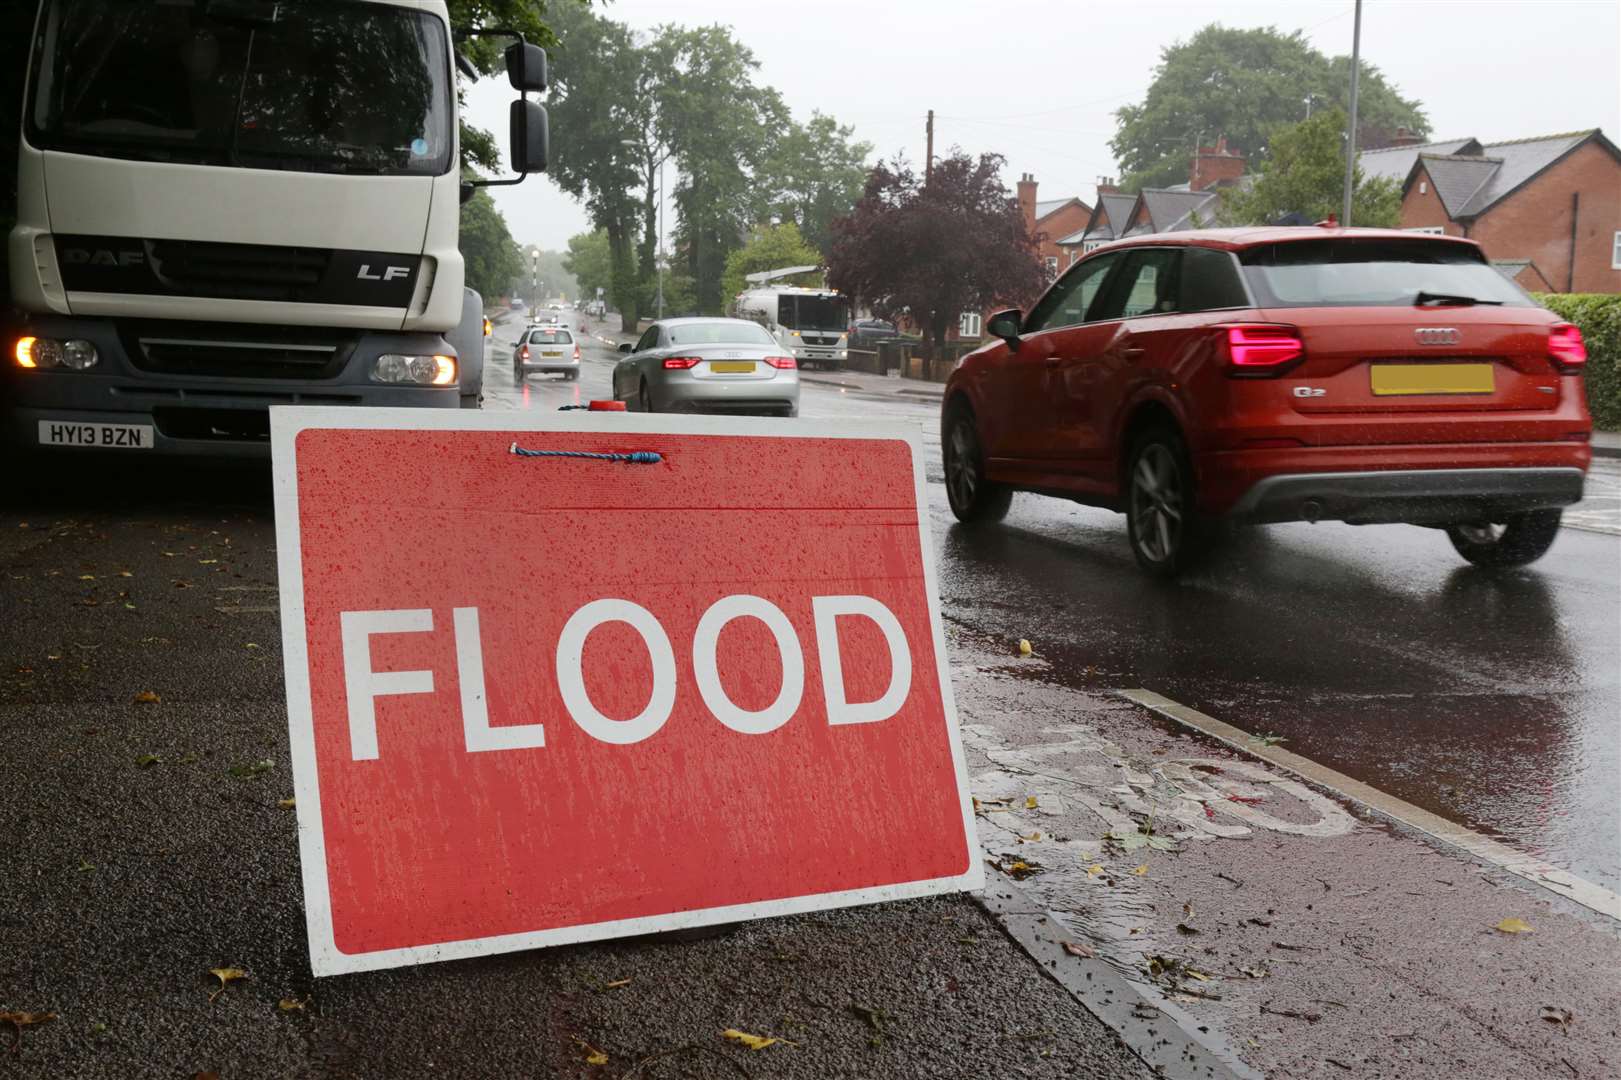 Flooding may occur in some areas of Kent